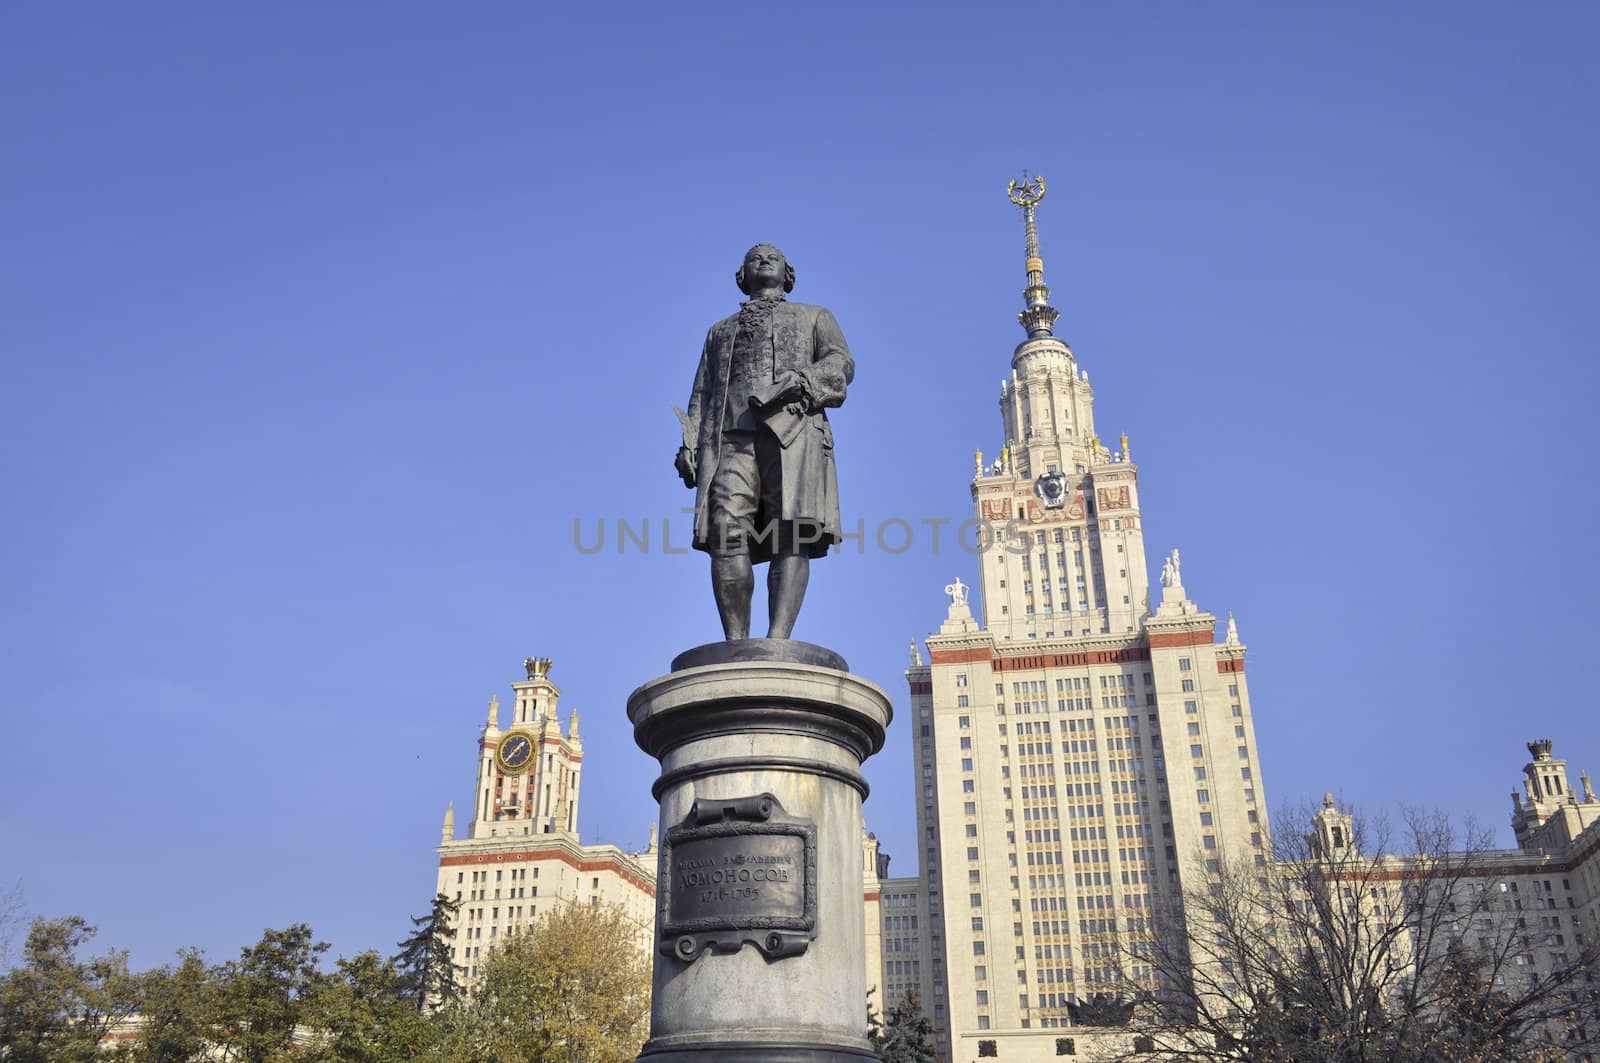 Lomonosov monument and main building of Moscow state University behind it